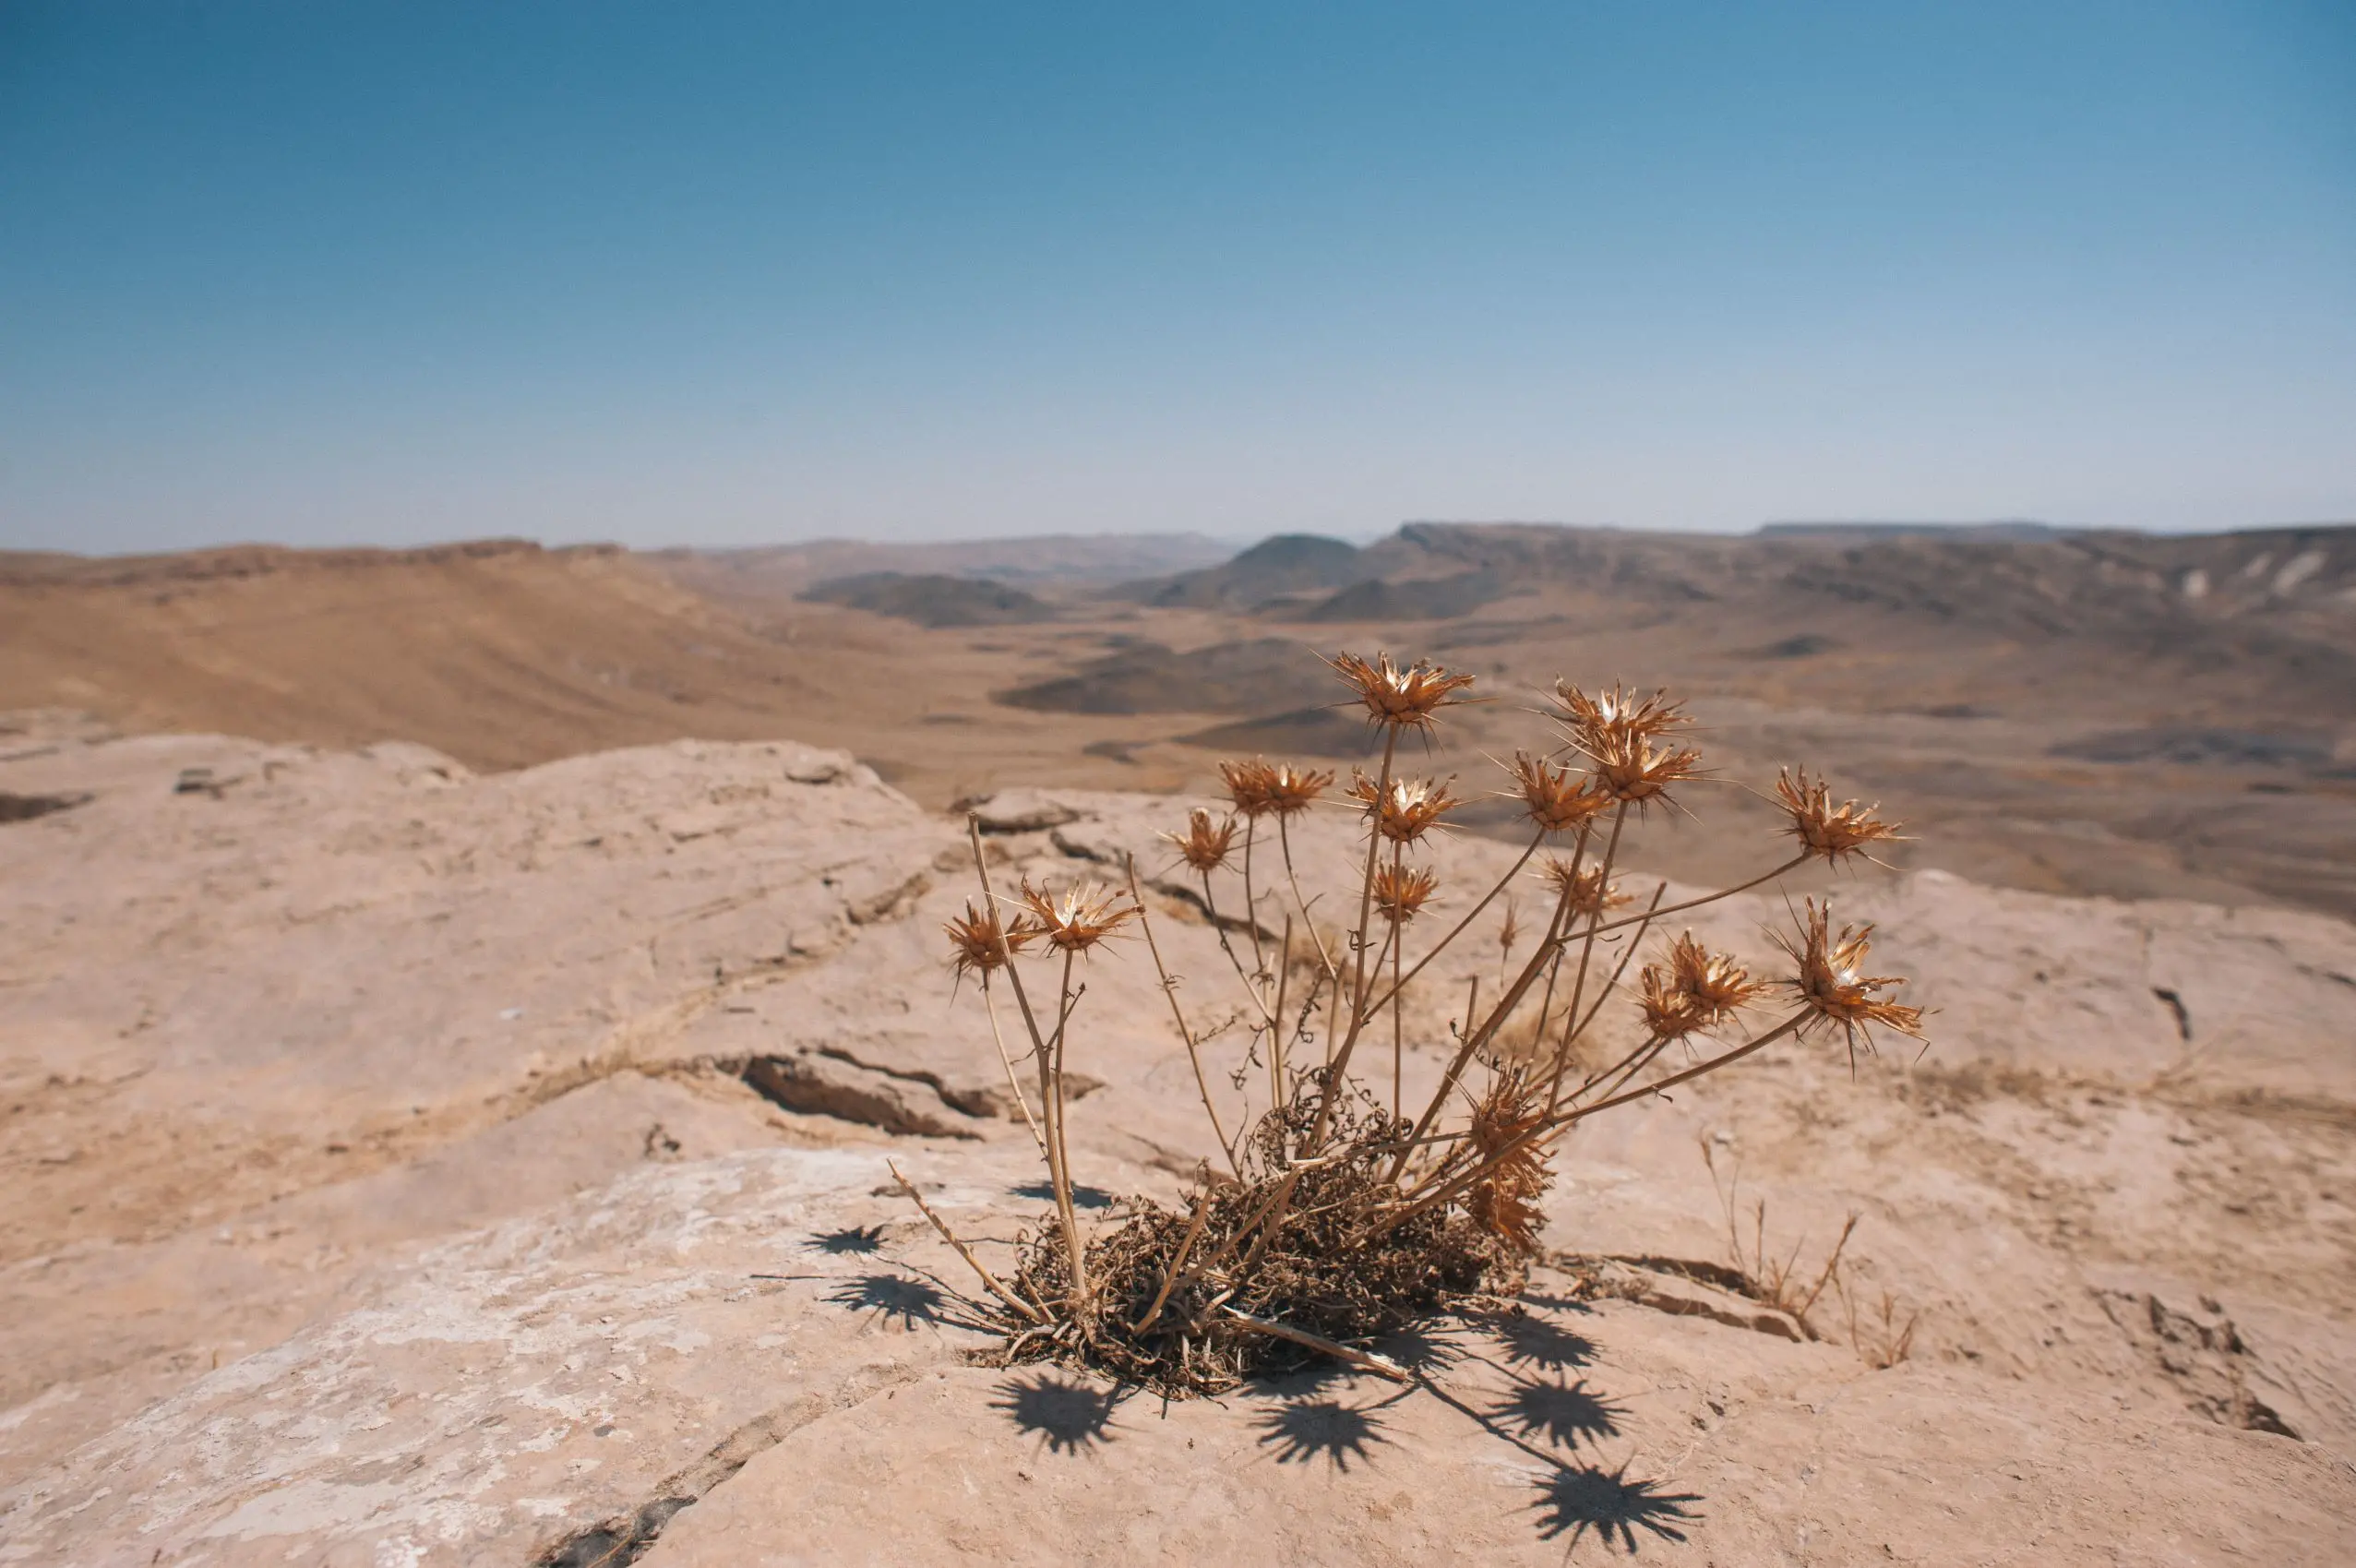 Dry plant foliage grown on a rocky surface in the Negev Desert, Israel.